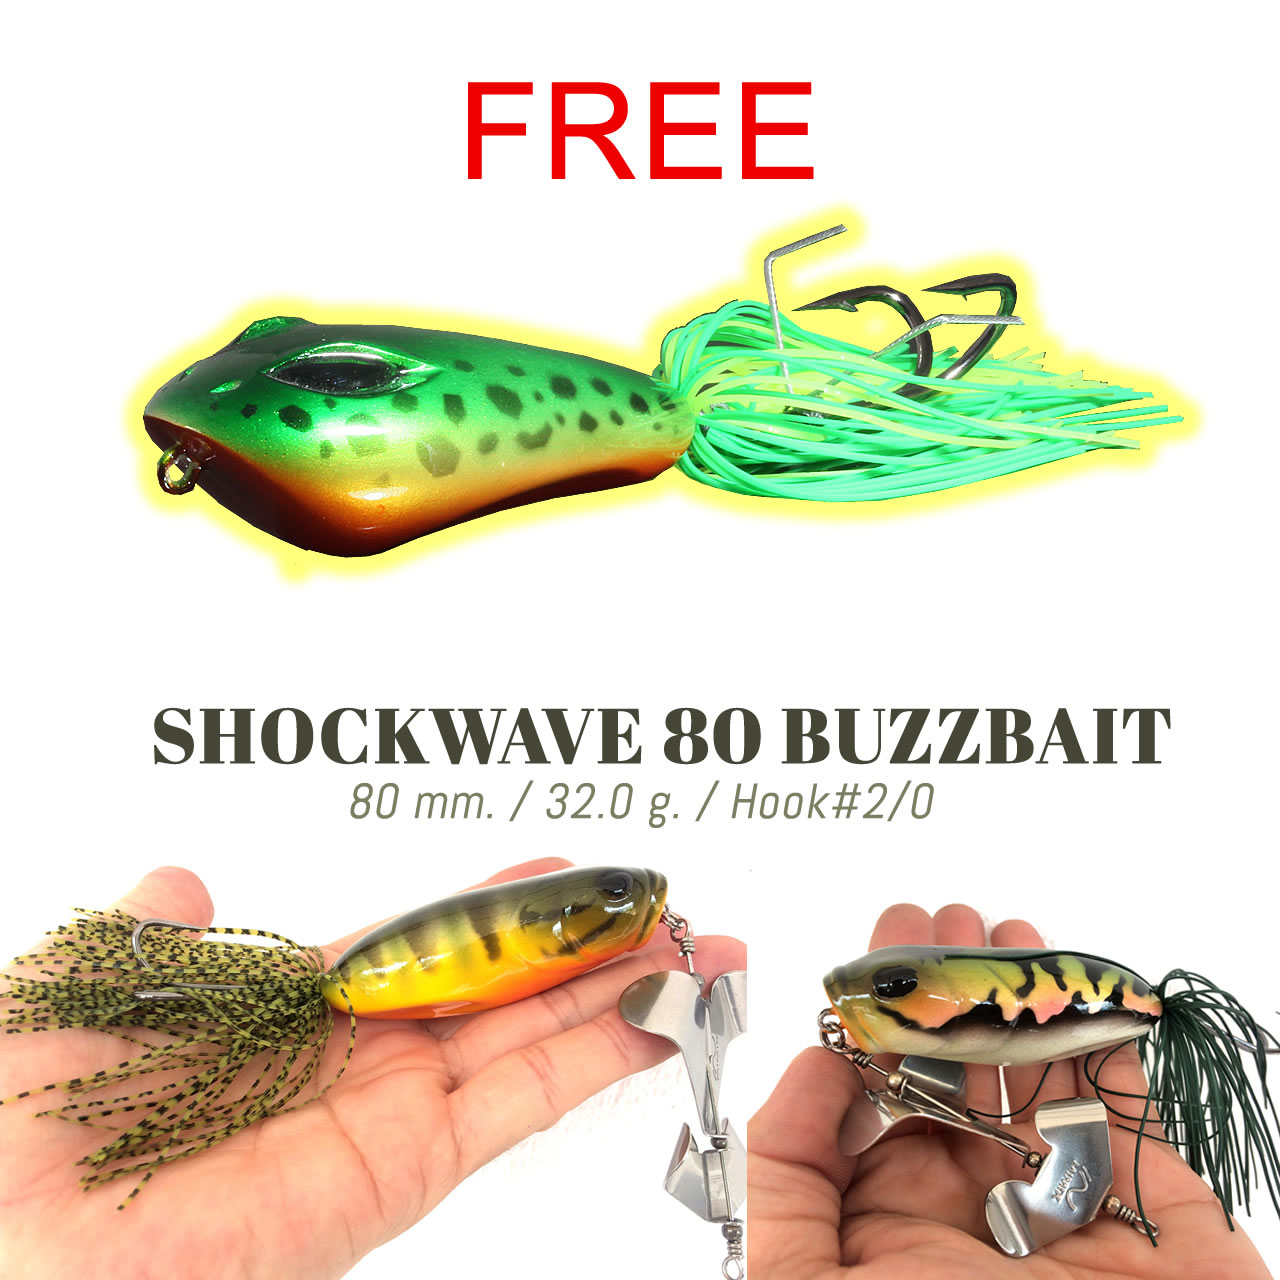 Buy 2 of 32 g. buzzbait and get 1 of 25 g. jump frog for FREE!